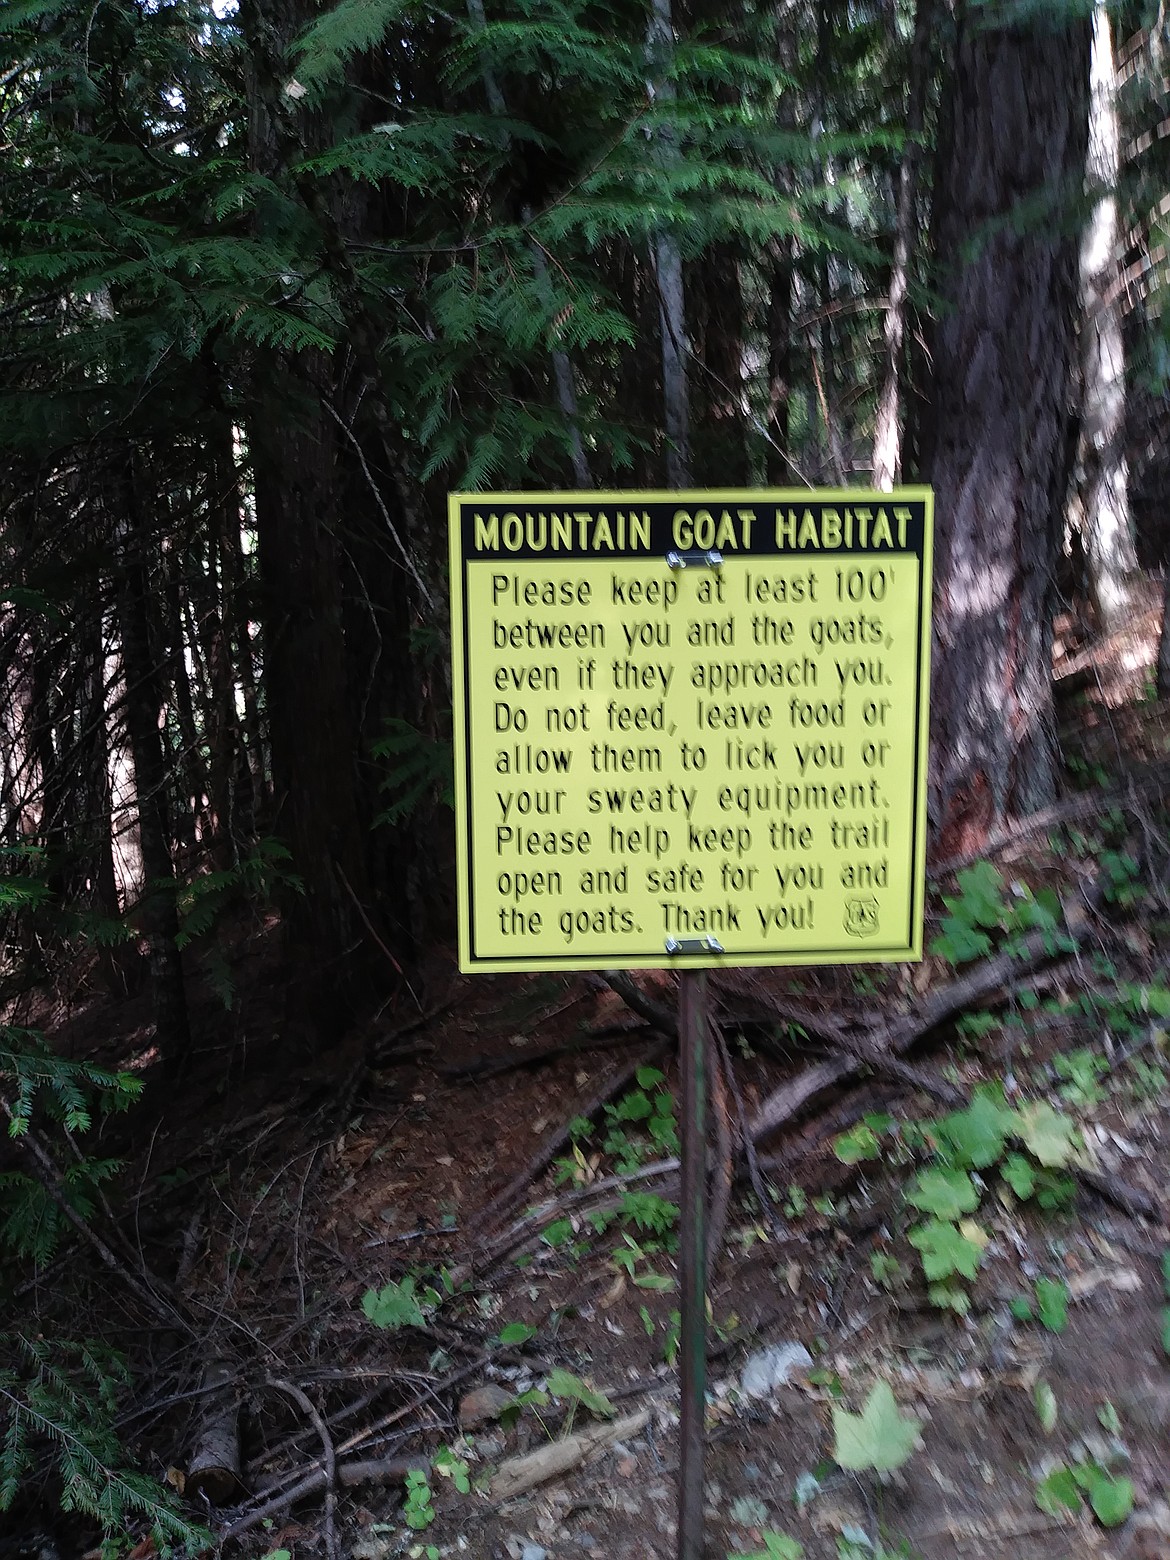 (Courtesy photo)
A new Forest Service sign greets Scotchman Peaks hikers low on the trail, reminding people to keep their distance from the mountain goats they may encounter higher on the mountain.